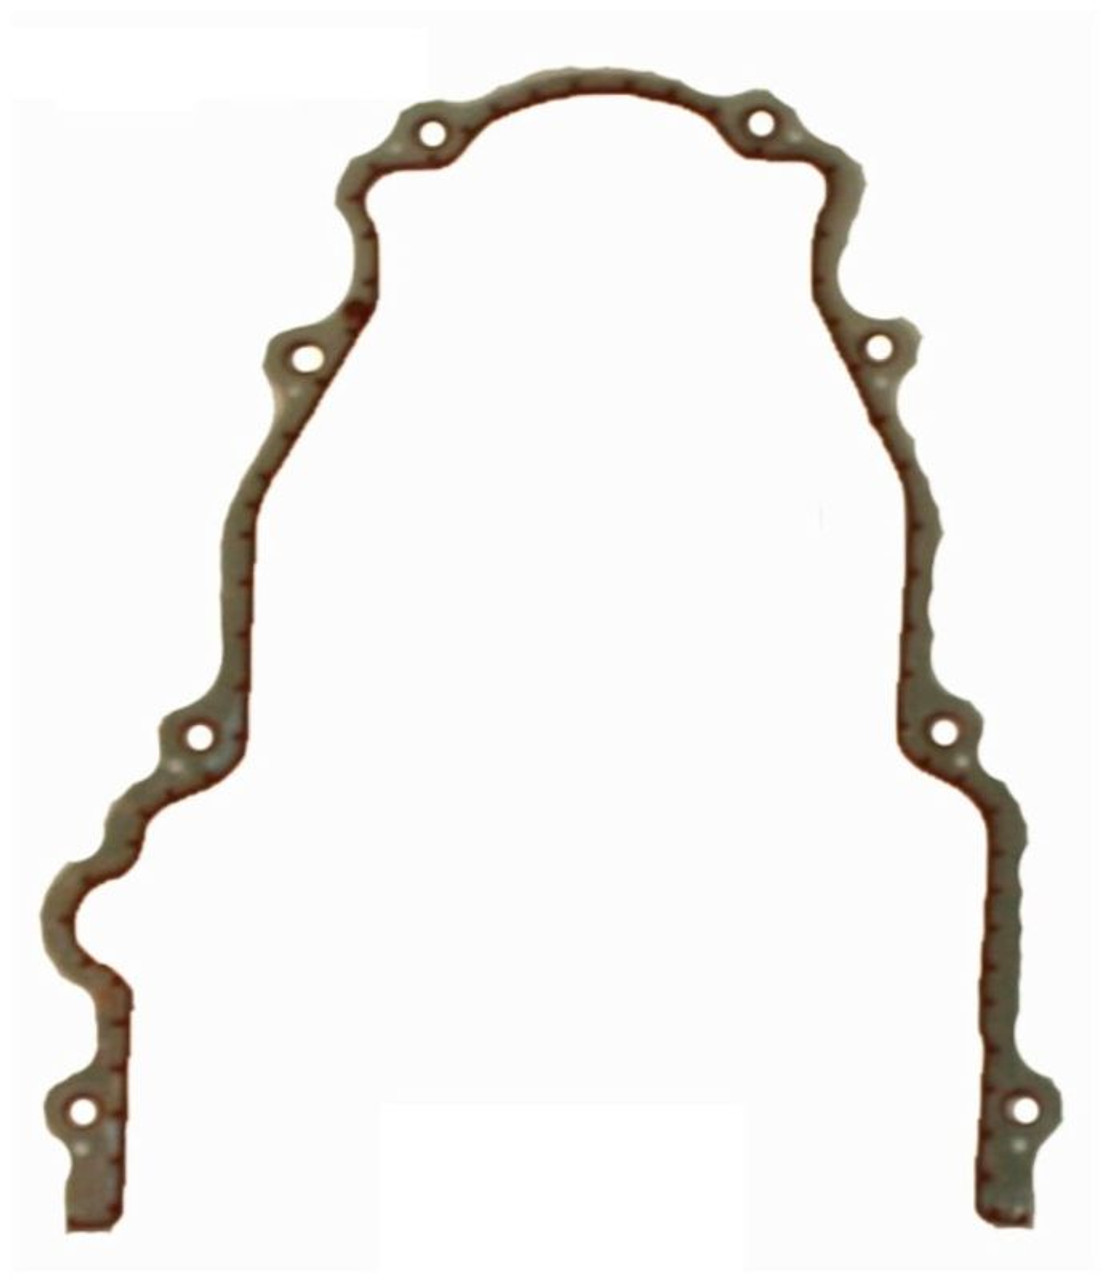 2003 Chevrolet Tahoe 5.3L Engine Timing Cover Gasket TCG293-A -142